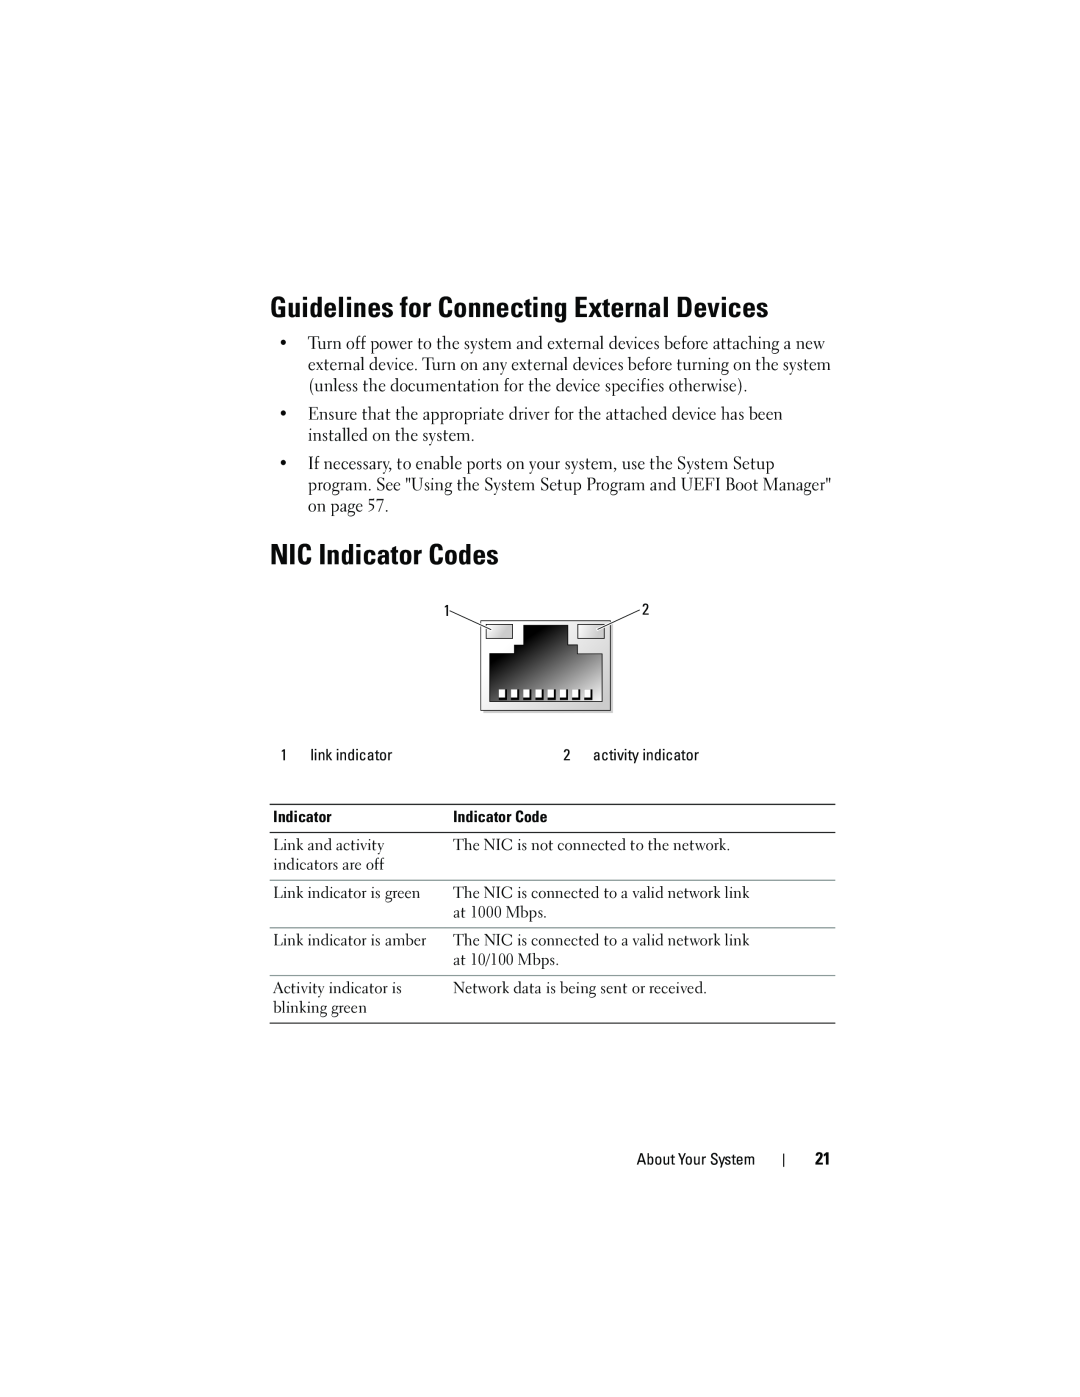 Dell T310 owner manual Guidelines for Connecting External Devices, NIC Indicator Codes 